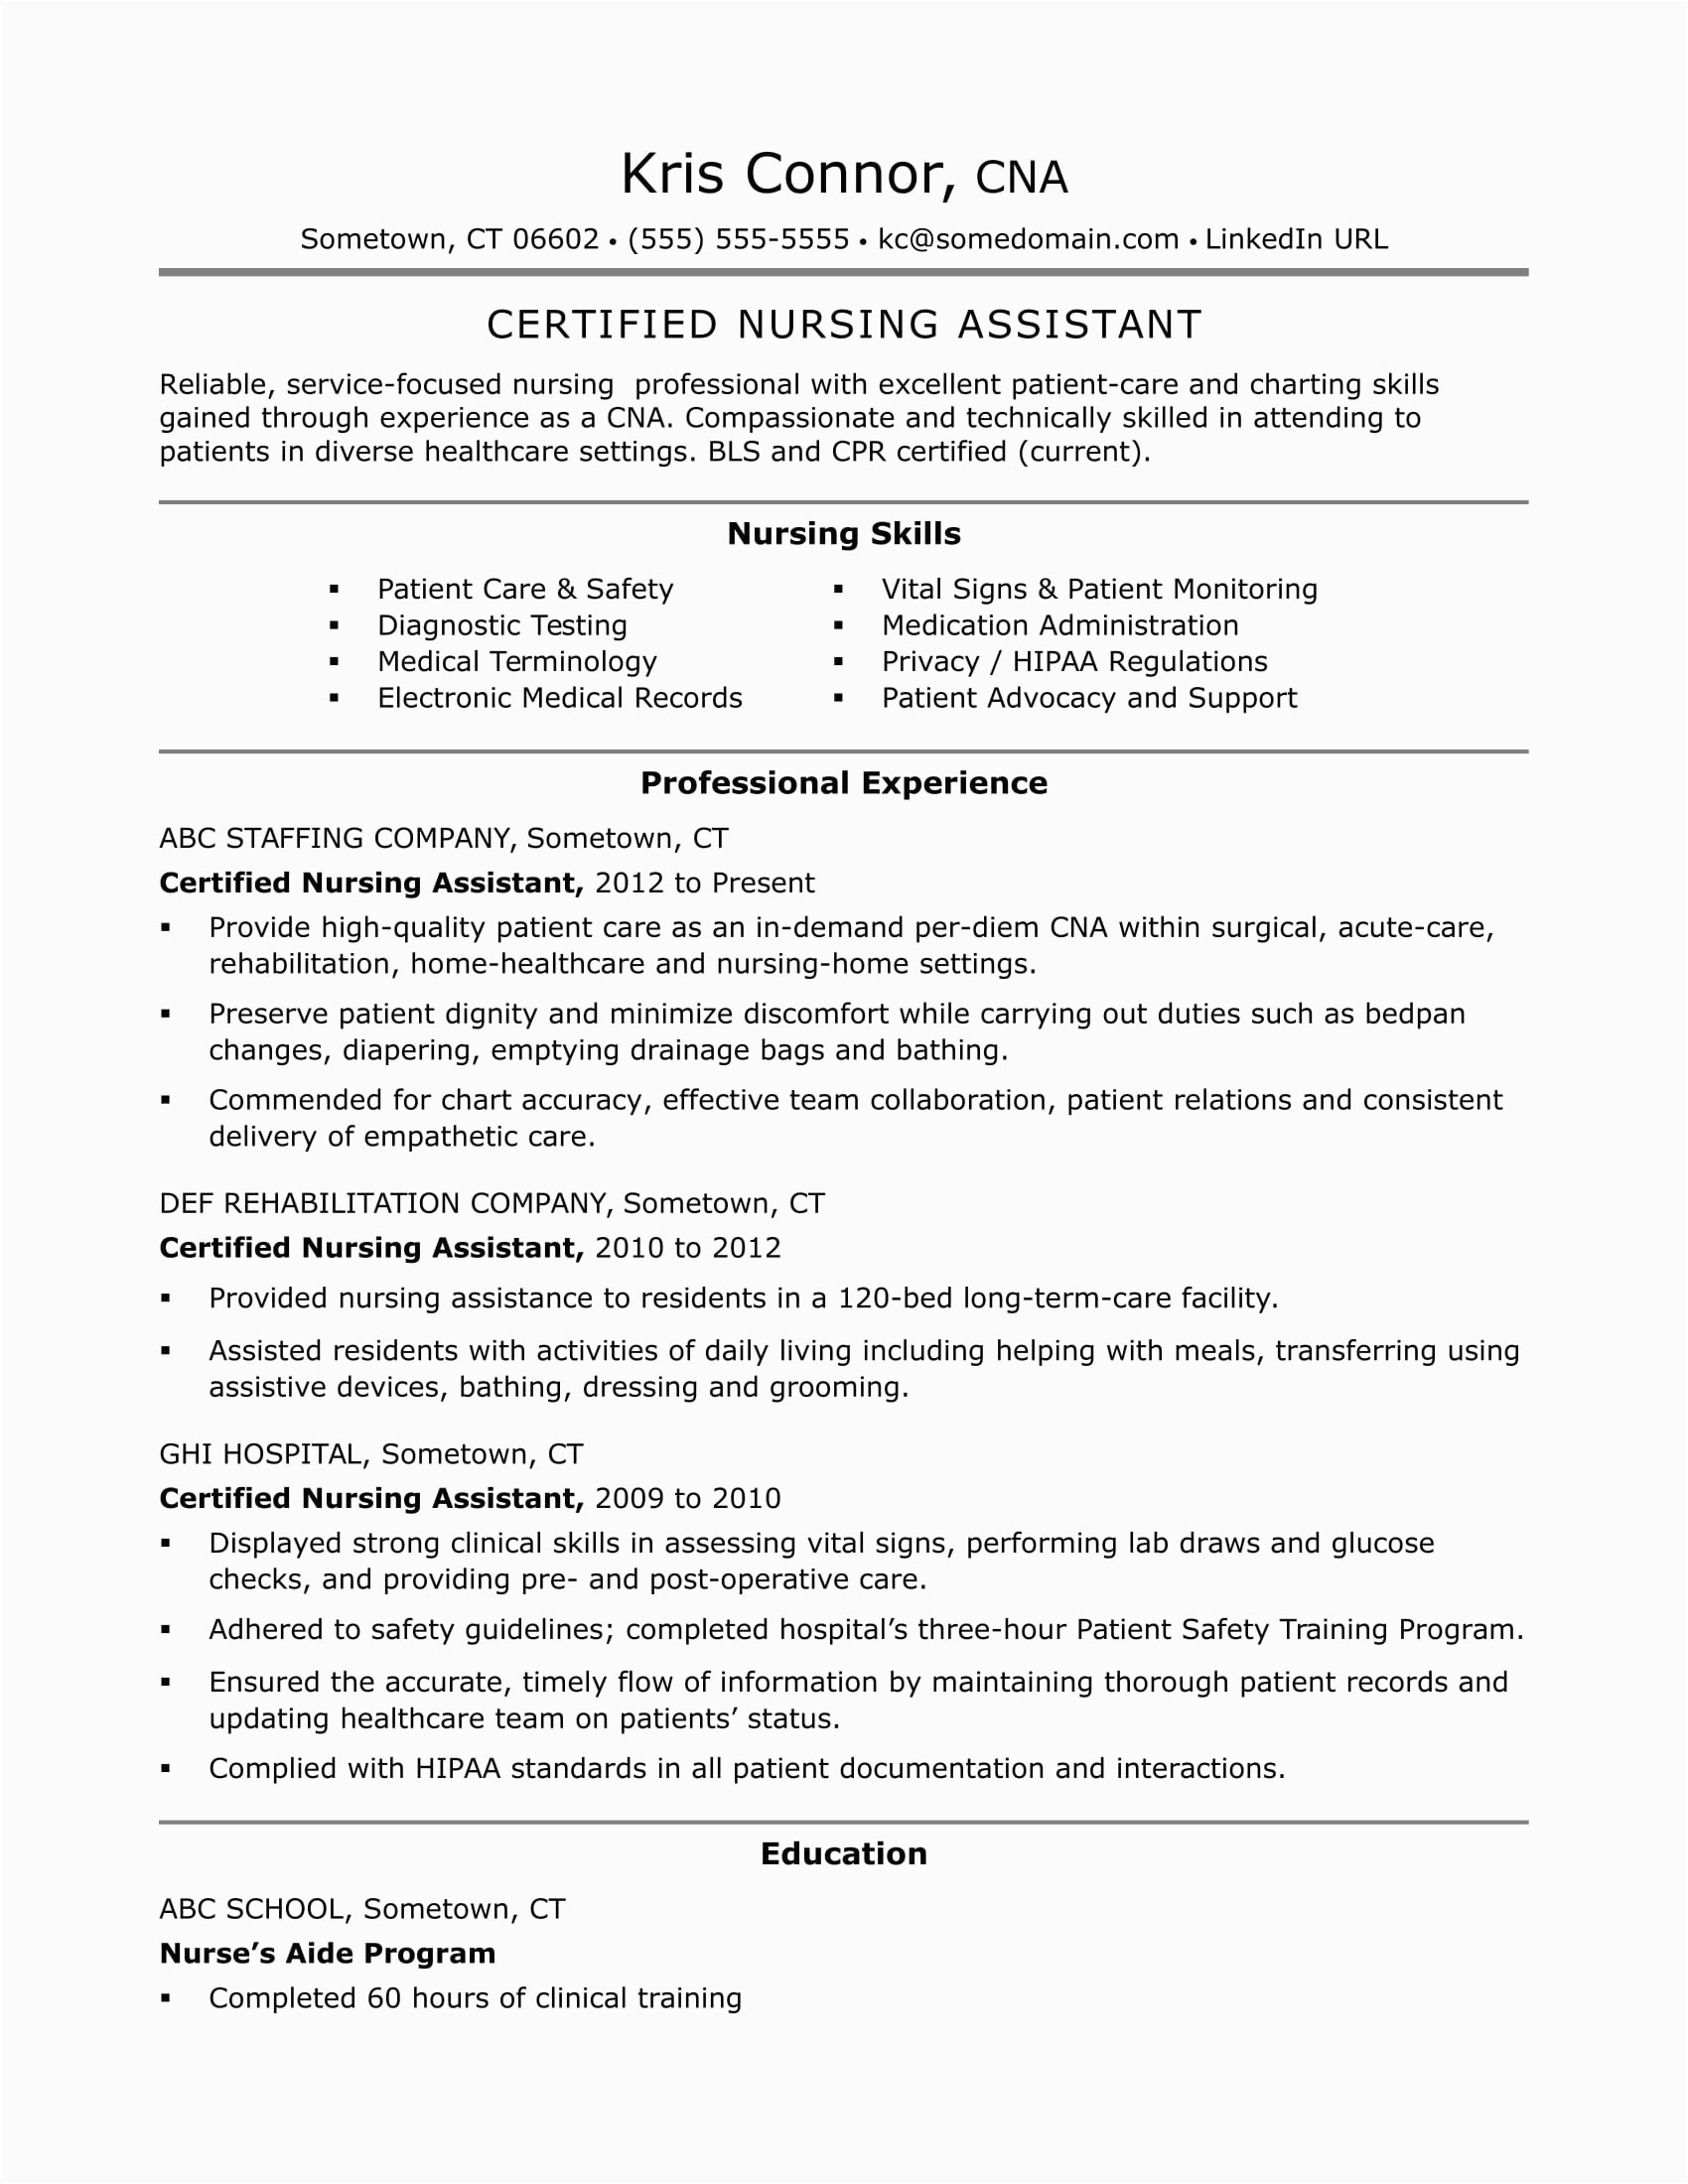 Sample Of Resume for Cna that Can Be Edited Free Cna Resume Examples Skills for Cnas